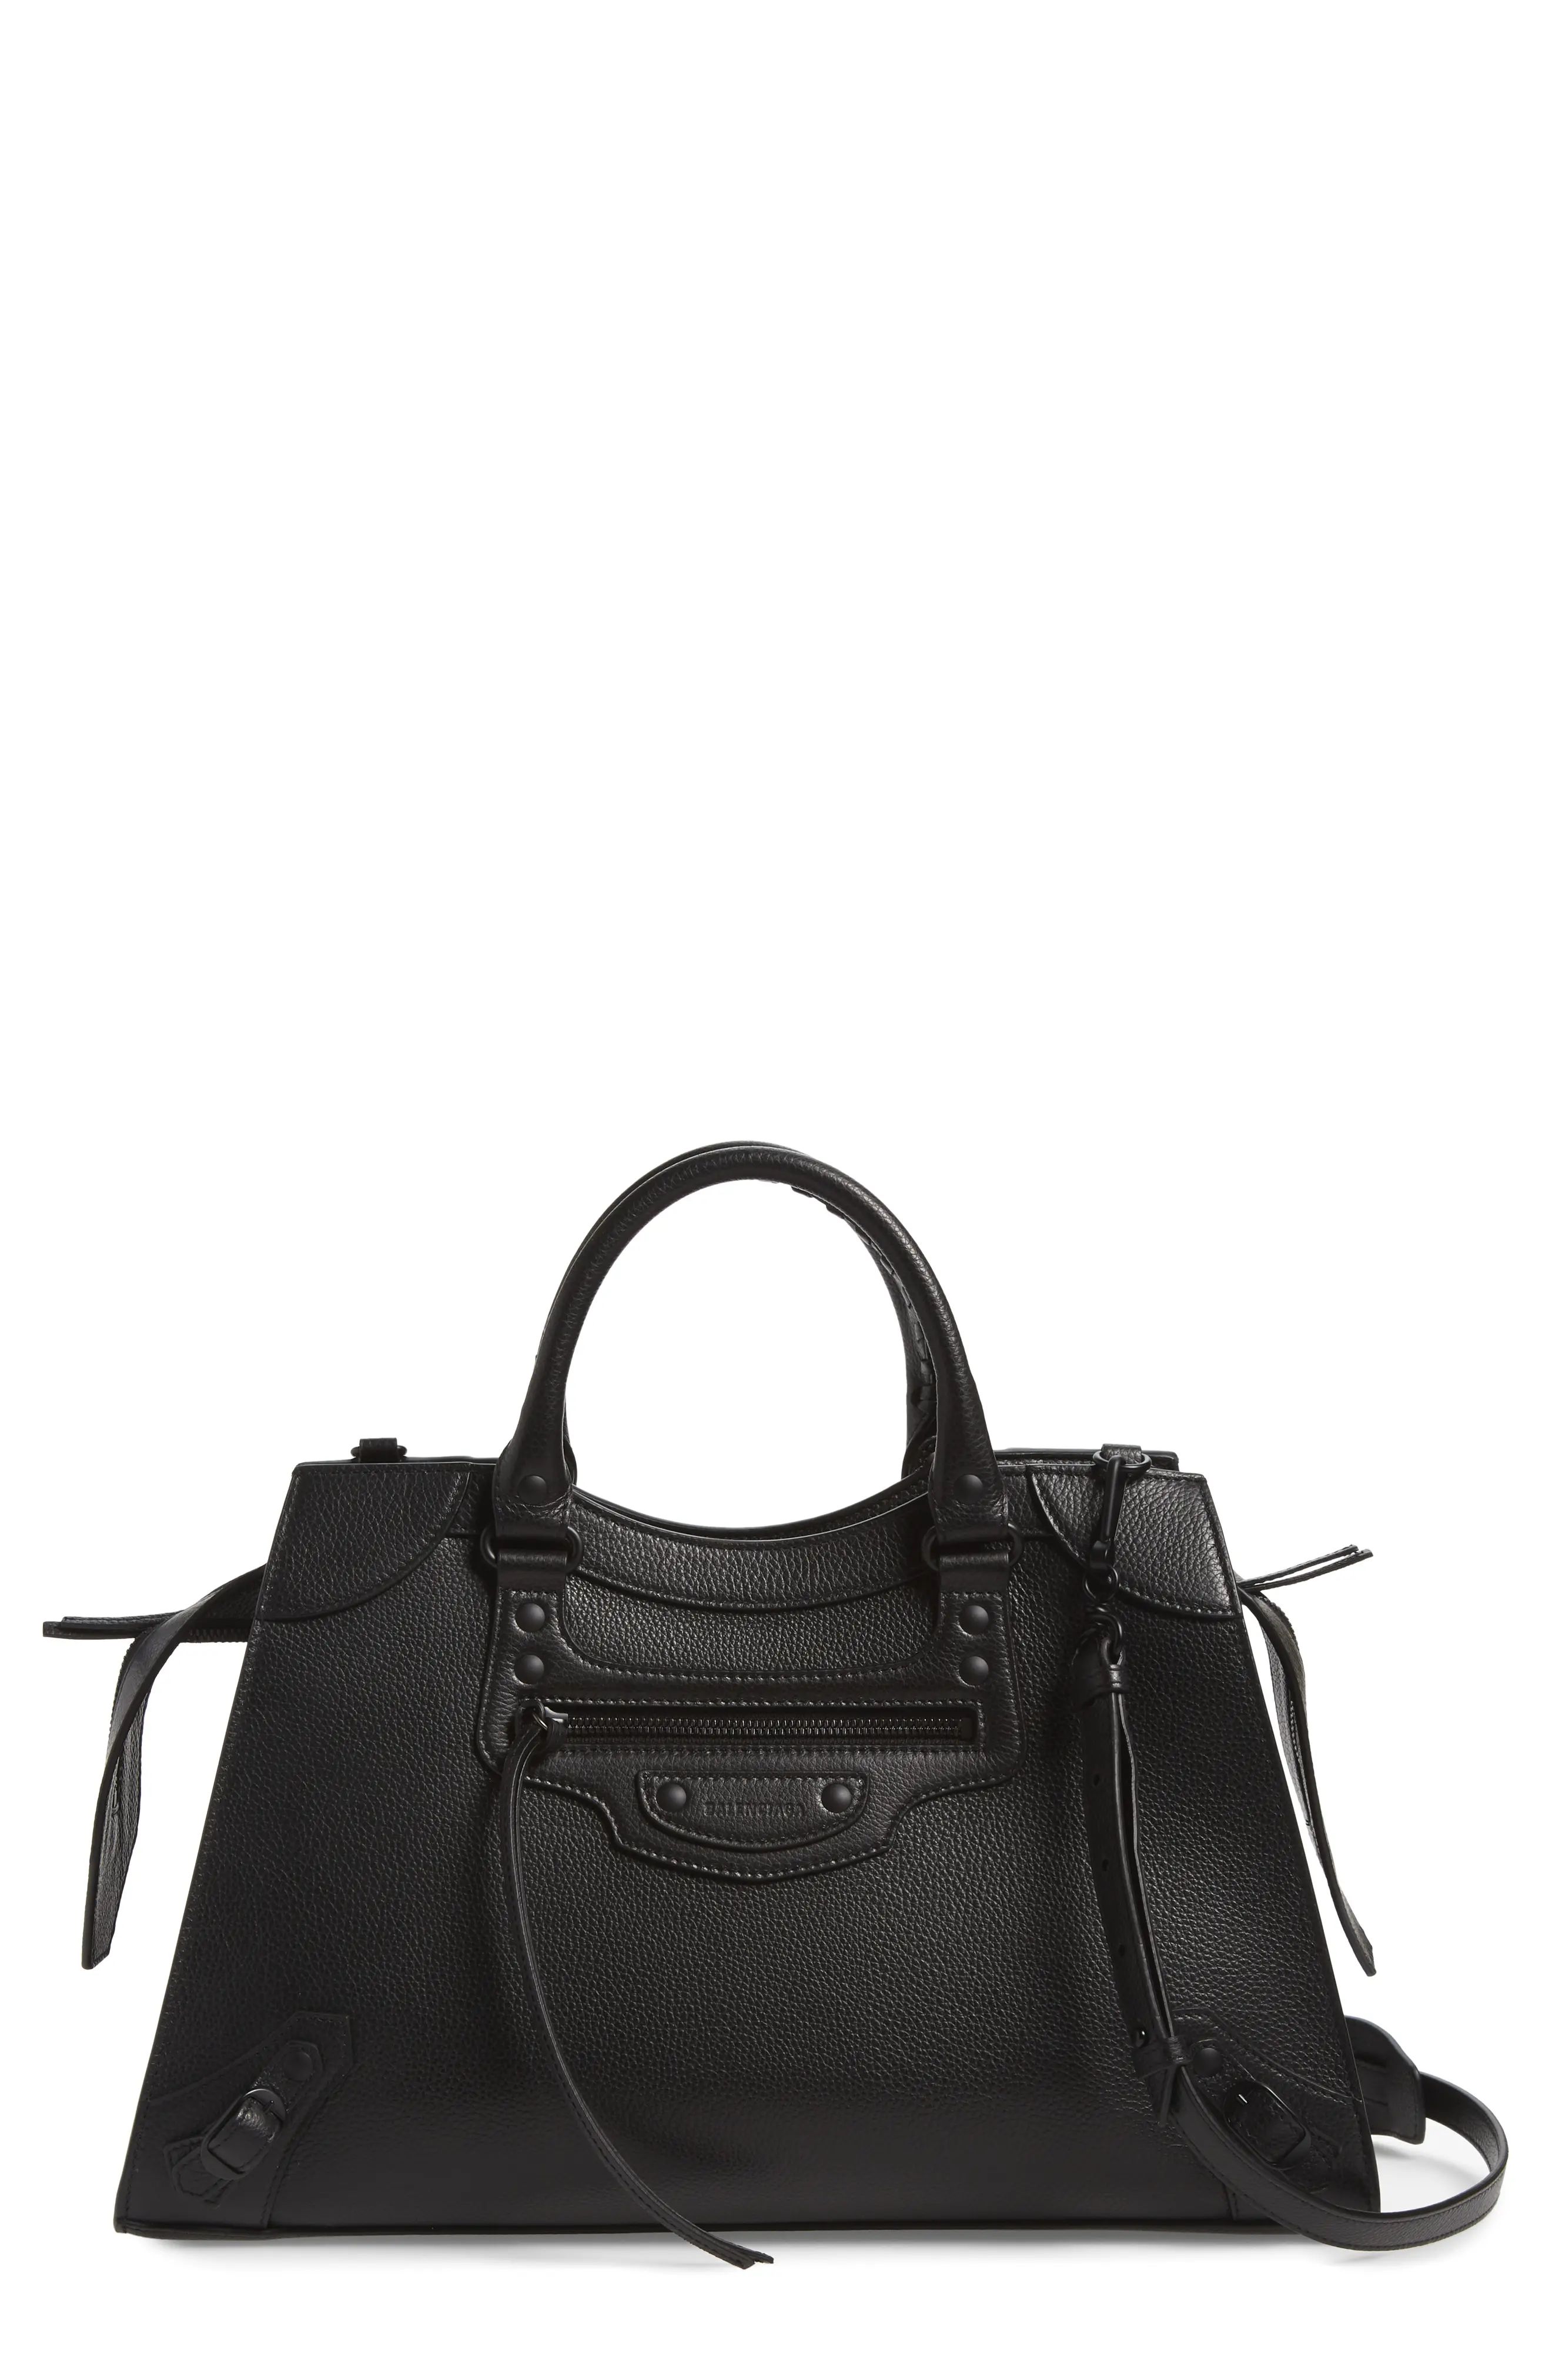 Balenciaga Neo Classic City Leather Top Handle Bag in Black at Nordstrom | Nordstrom